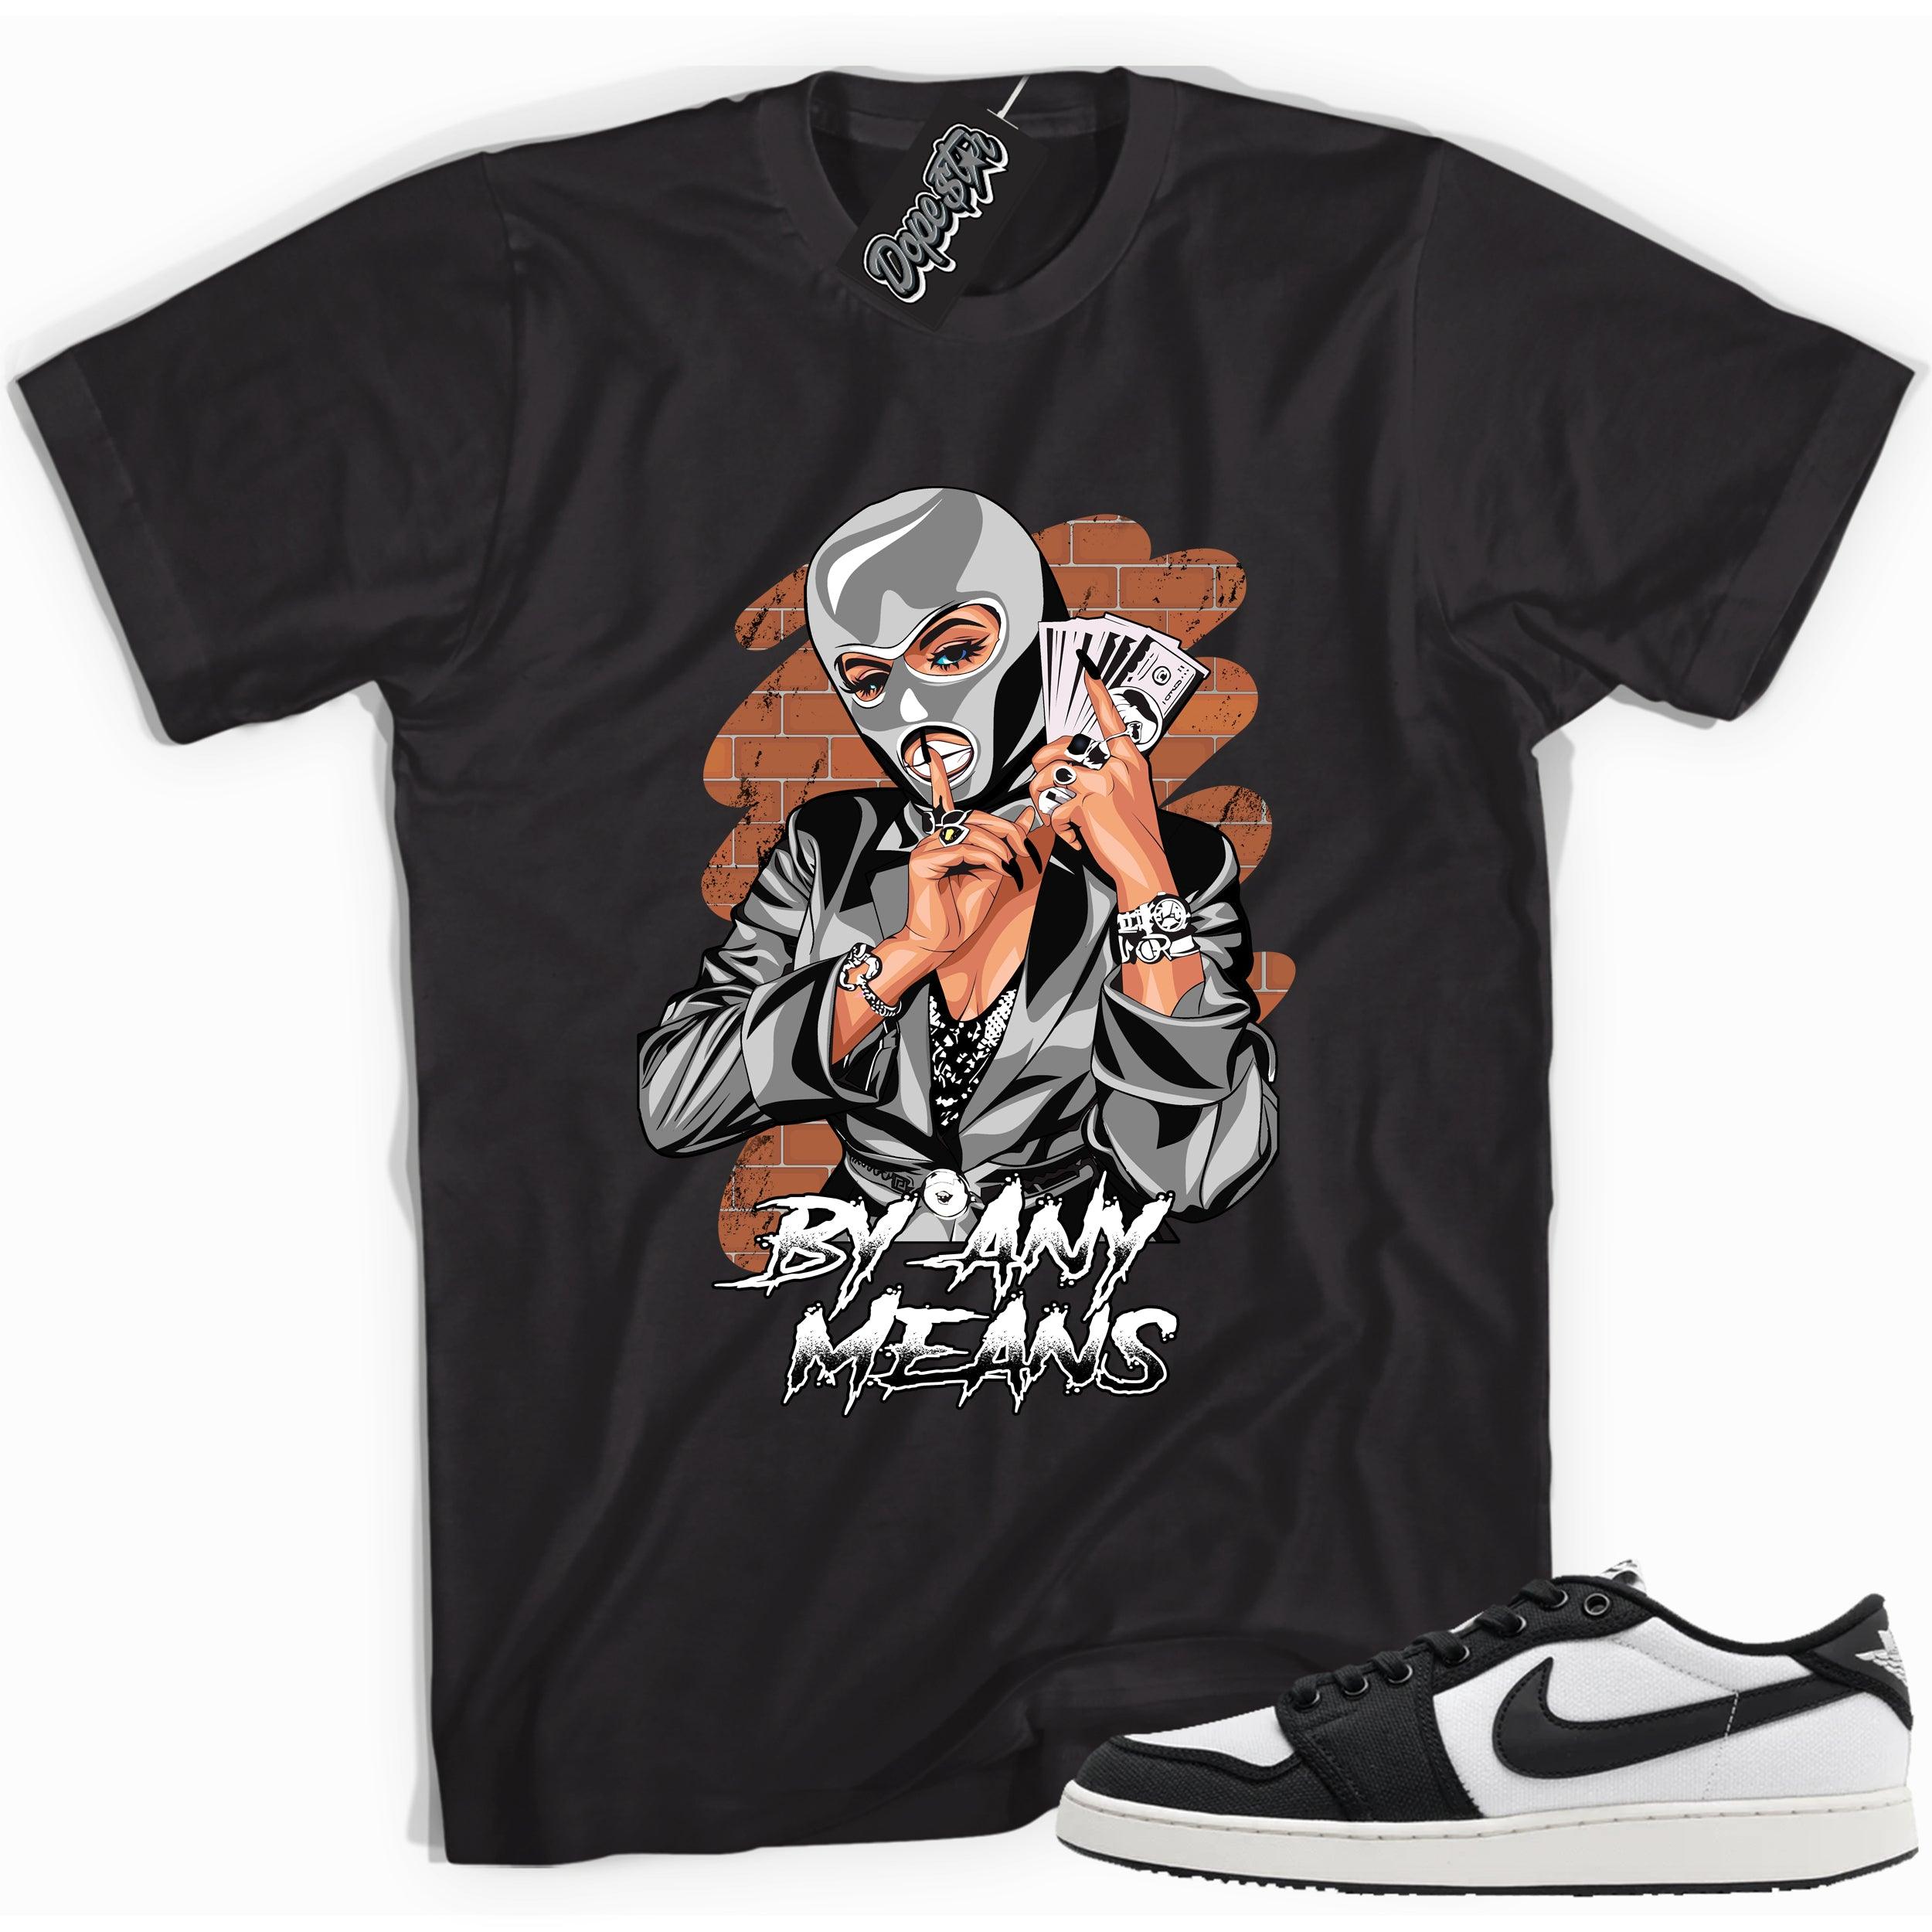 Cool black graphic tee with 'by any means' print, that perfectly matches Air Jordan 1 Retro Ajko Low Black & White sneakers.